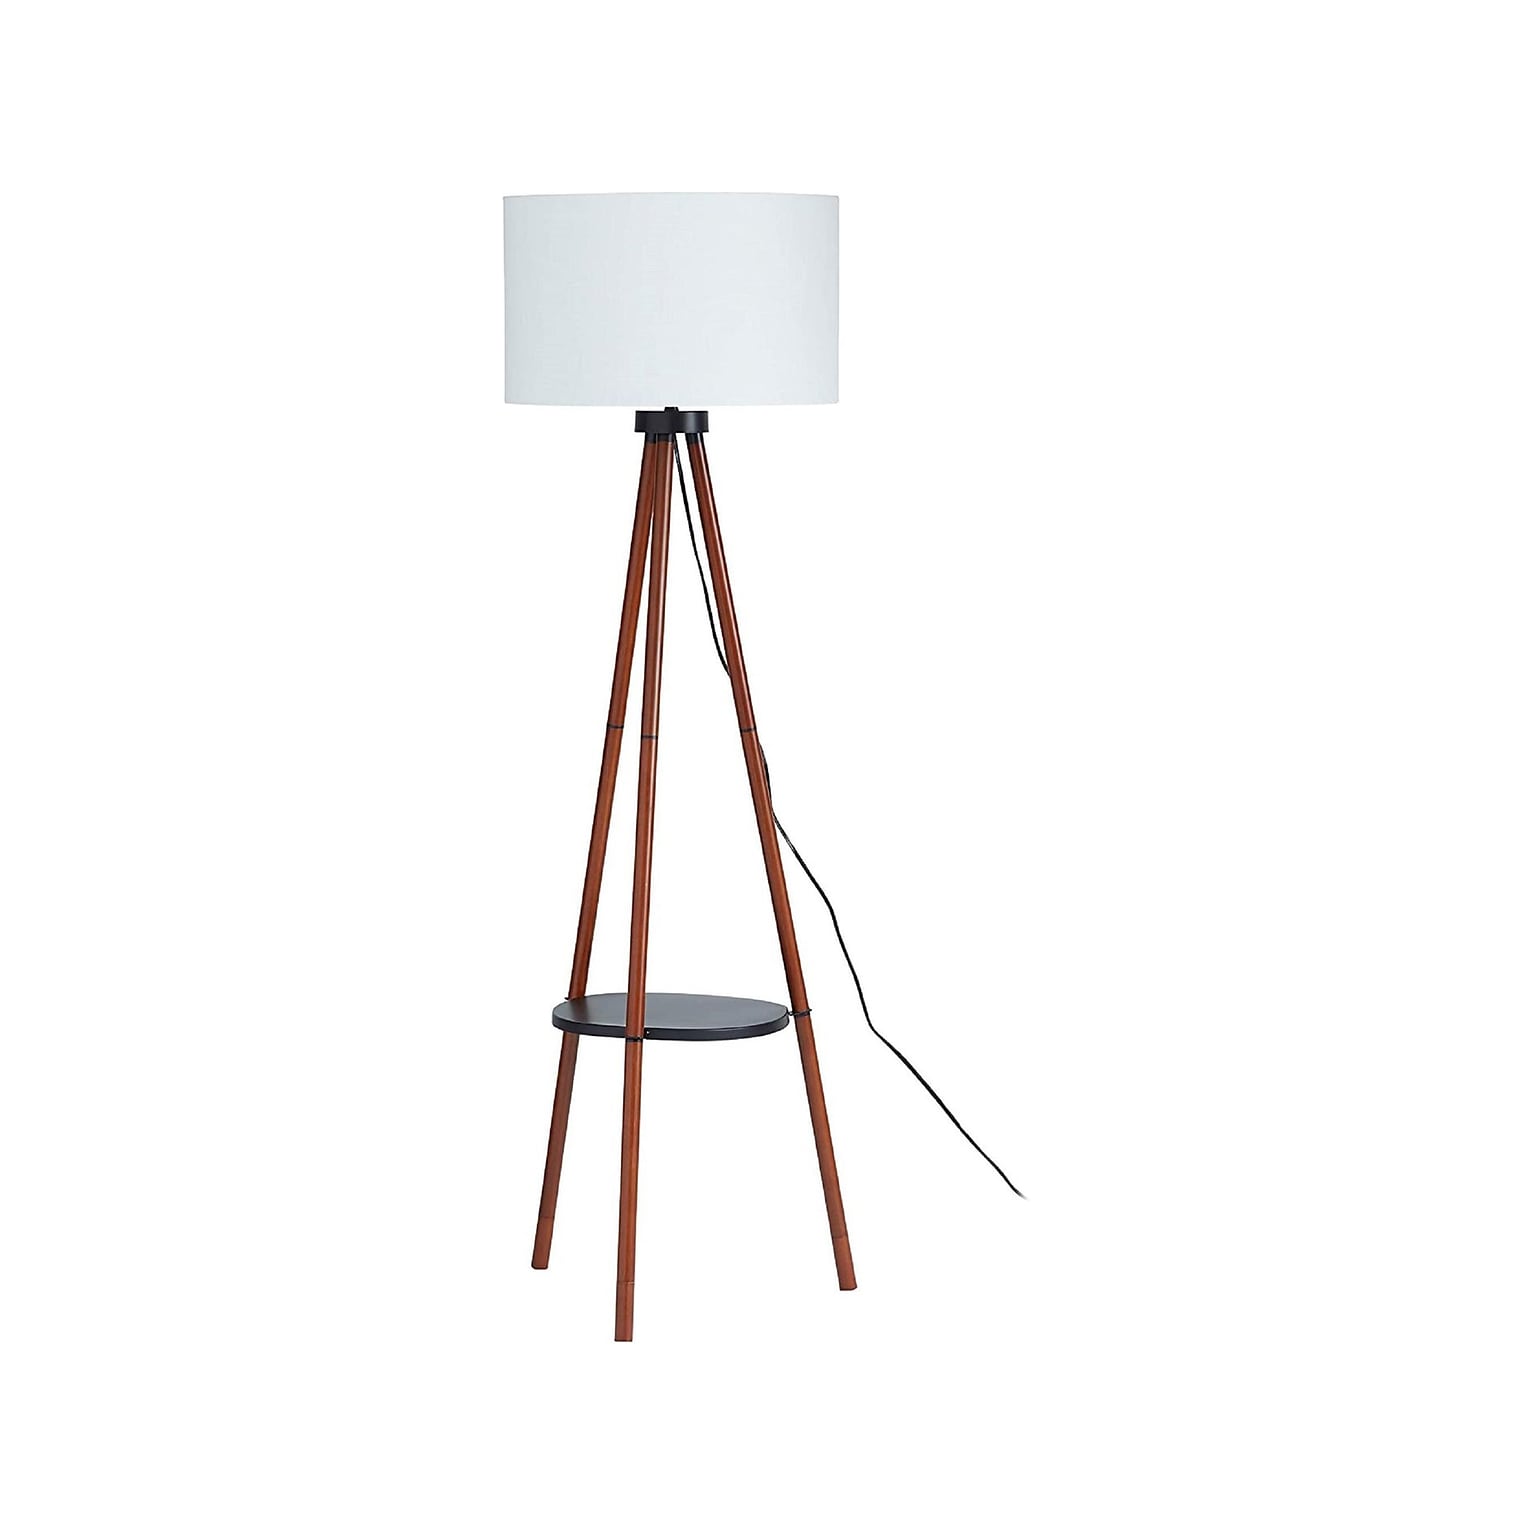 Simplee Adesso 61 Wood Floor Lamp with Cylindrical Shade (AF48519)